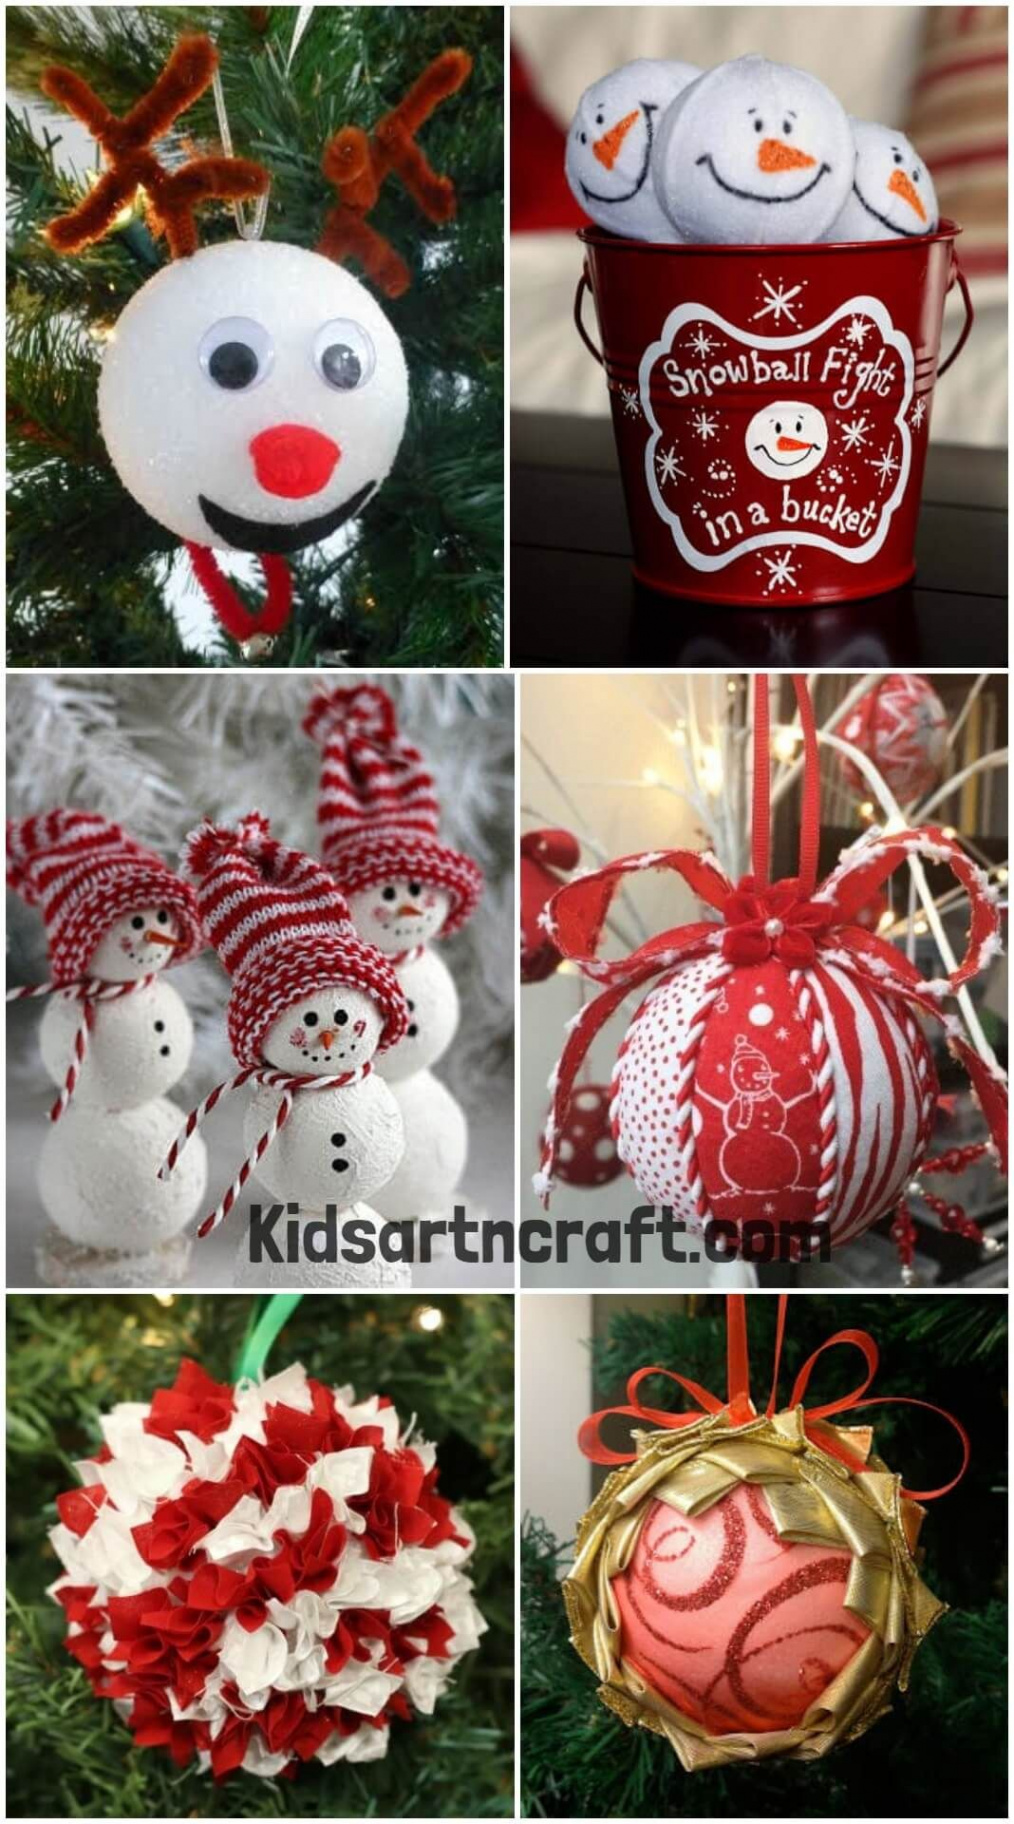 Creative DIY Styrofoam Ball Crafts and Ornaments for Christmas